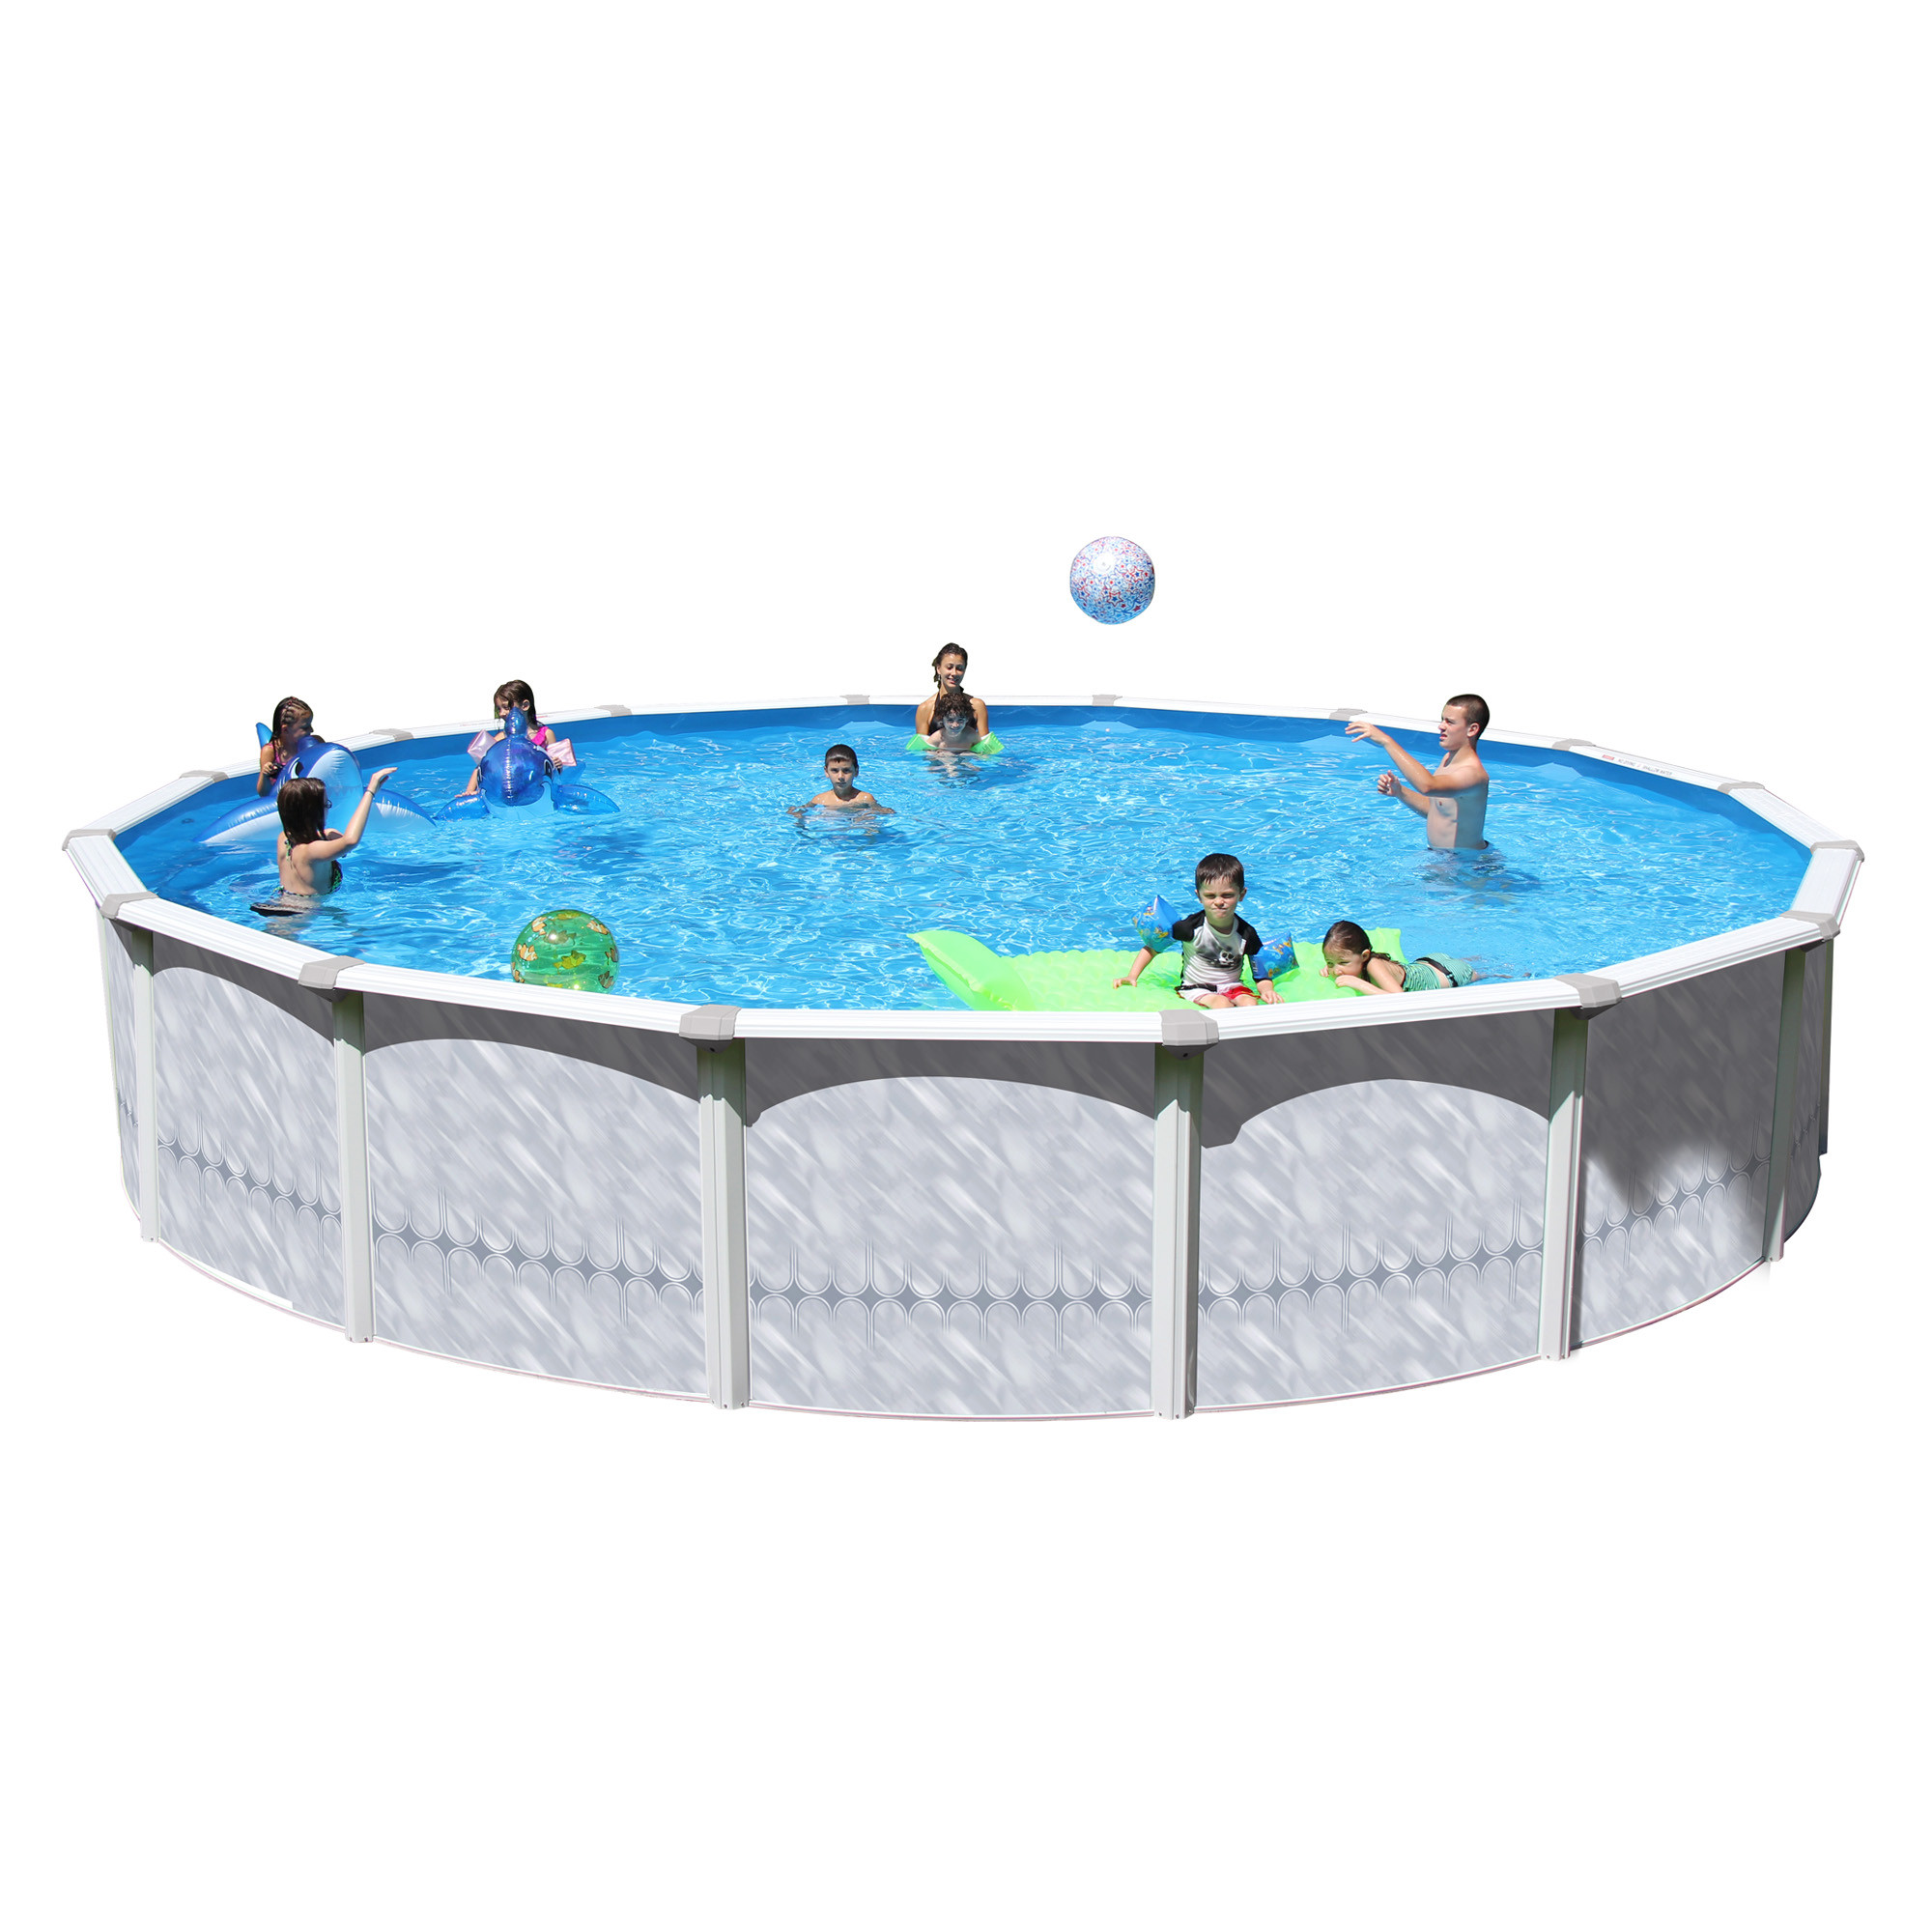 24 Above Ground Pool Packages
 Heritage 24 x 52" Taos plete Ground Pool Package